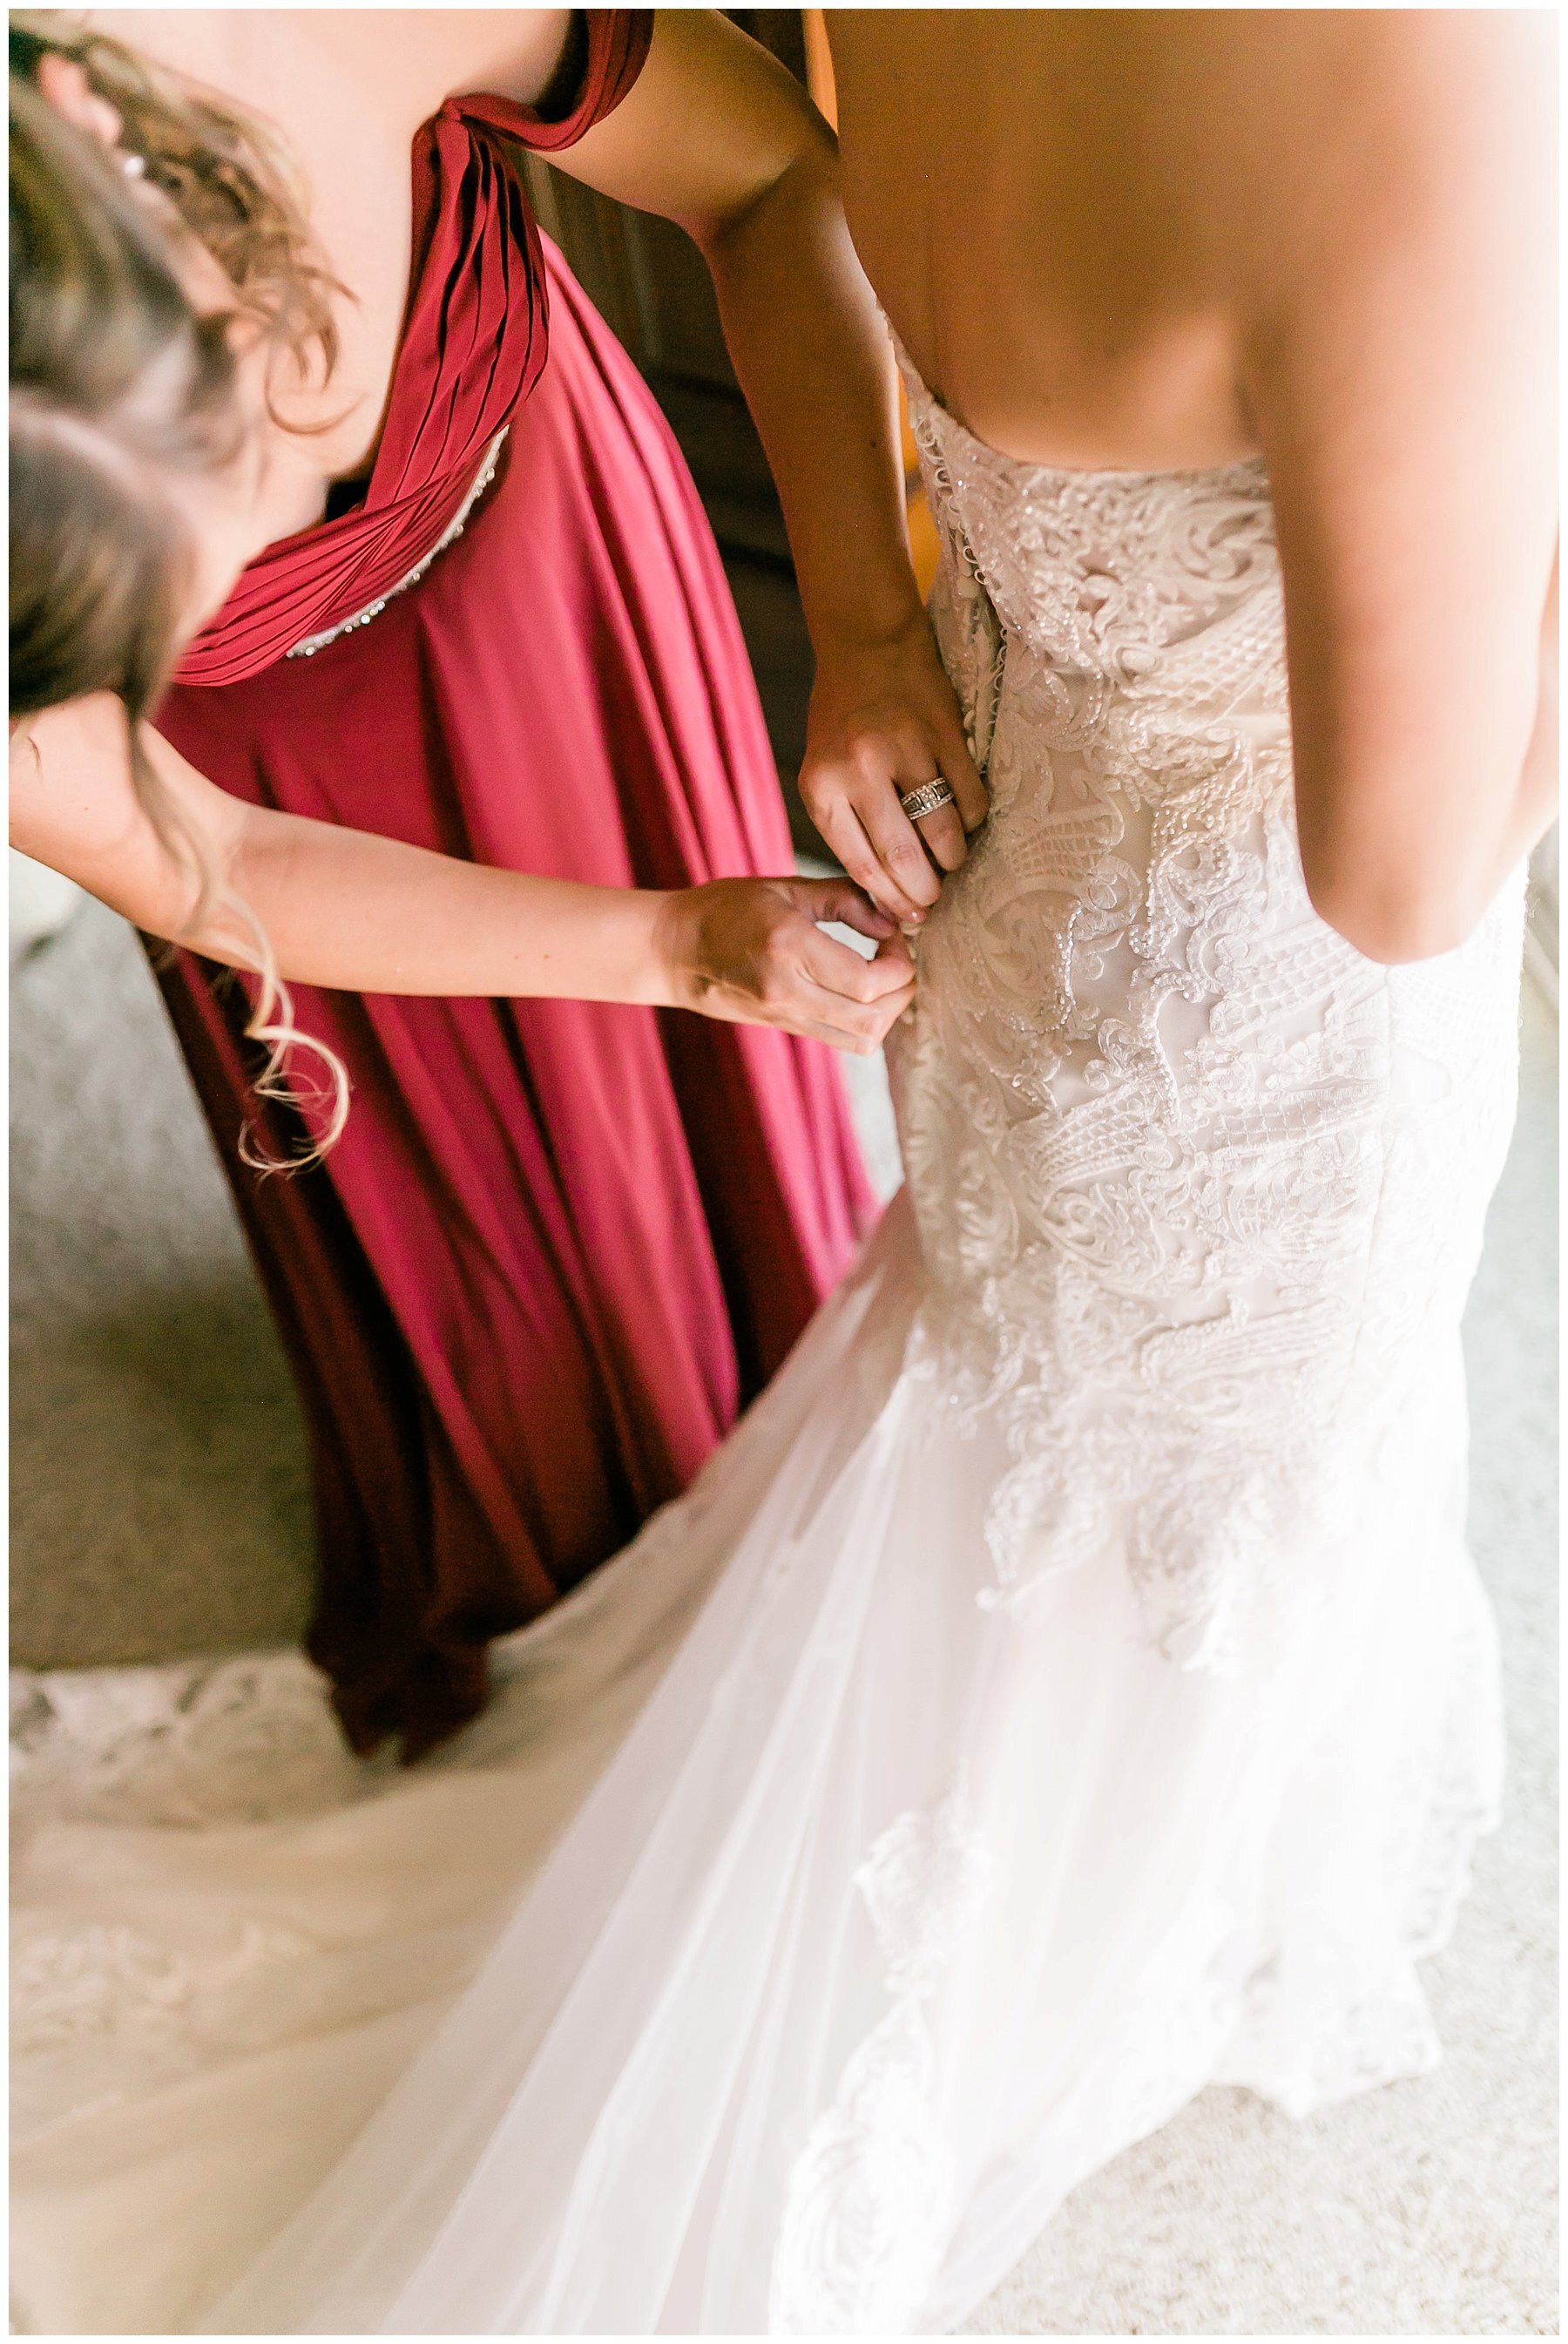  maid of honor helping bride get into her gown 